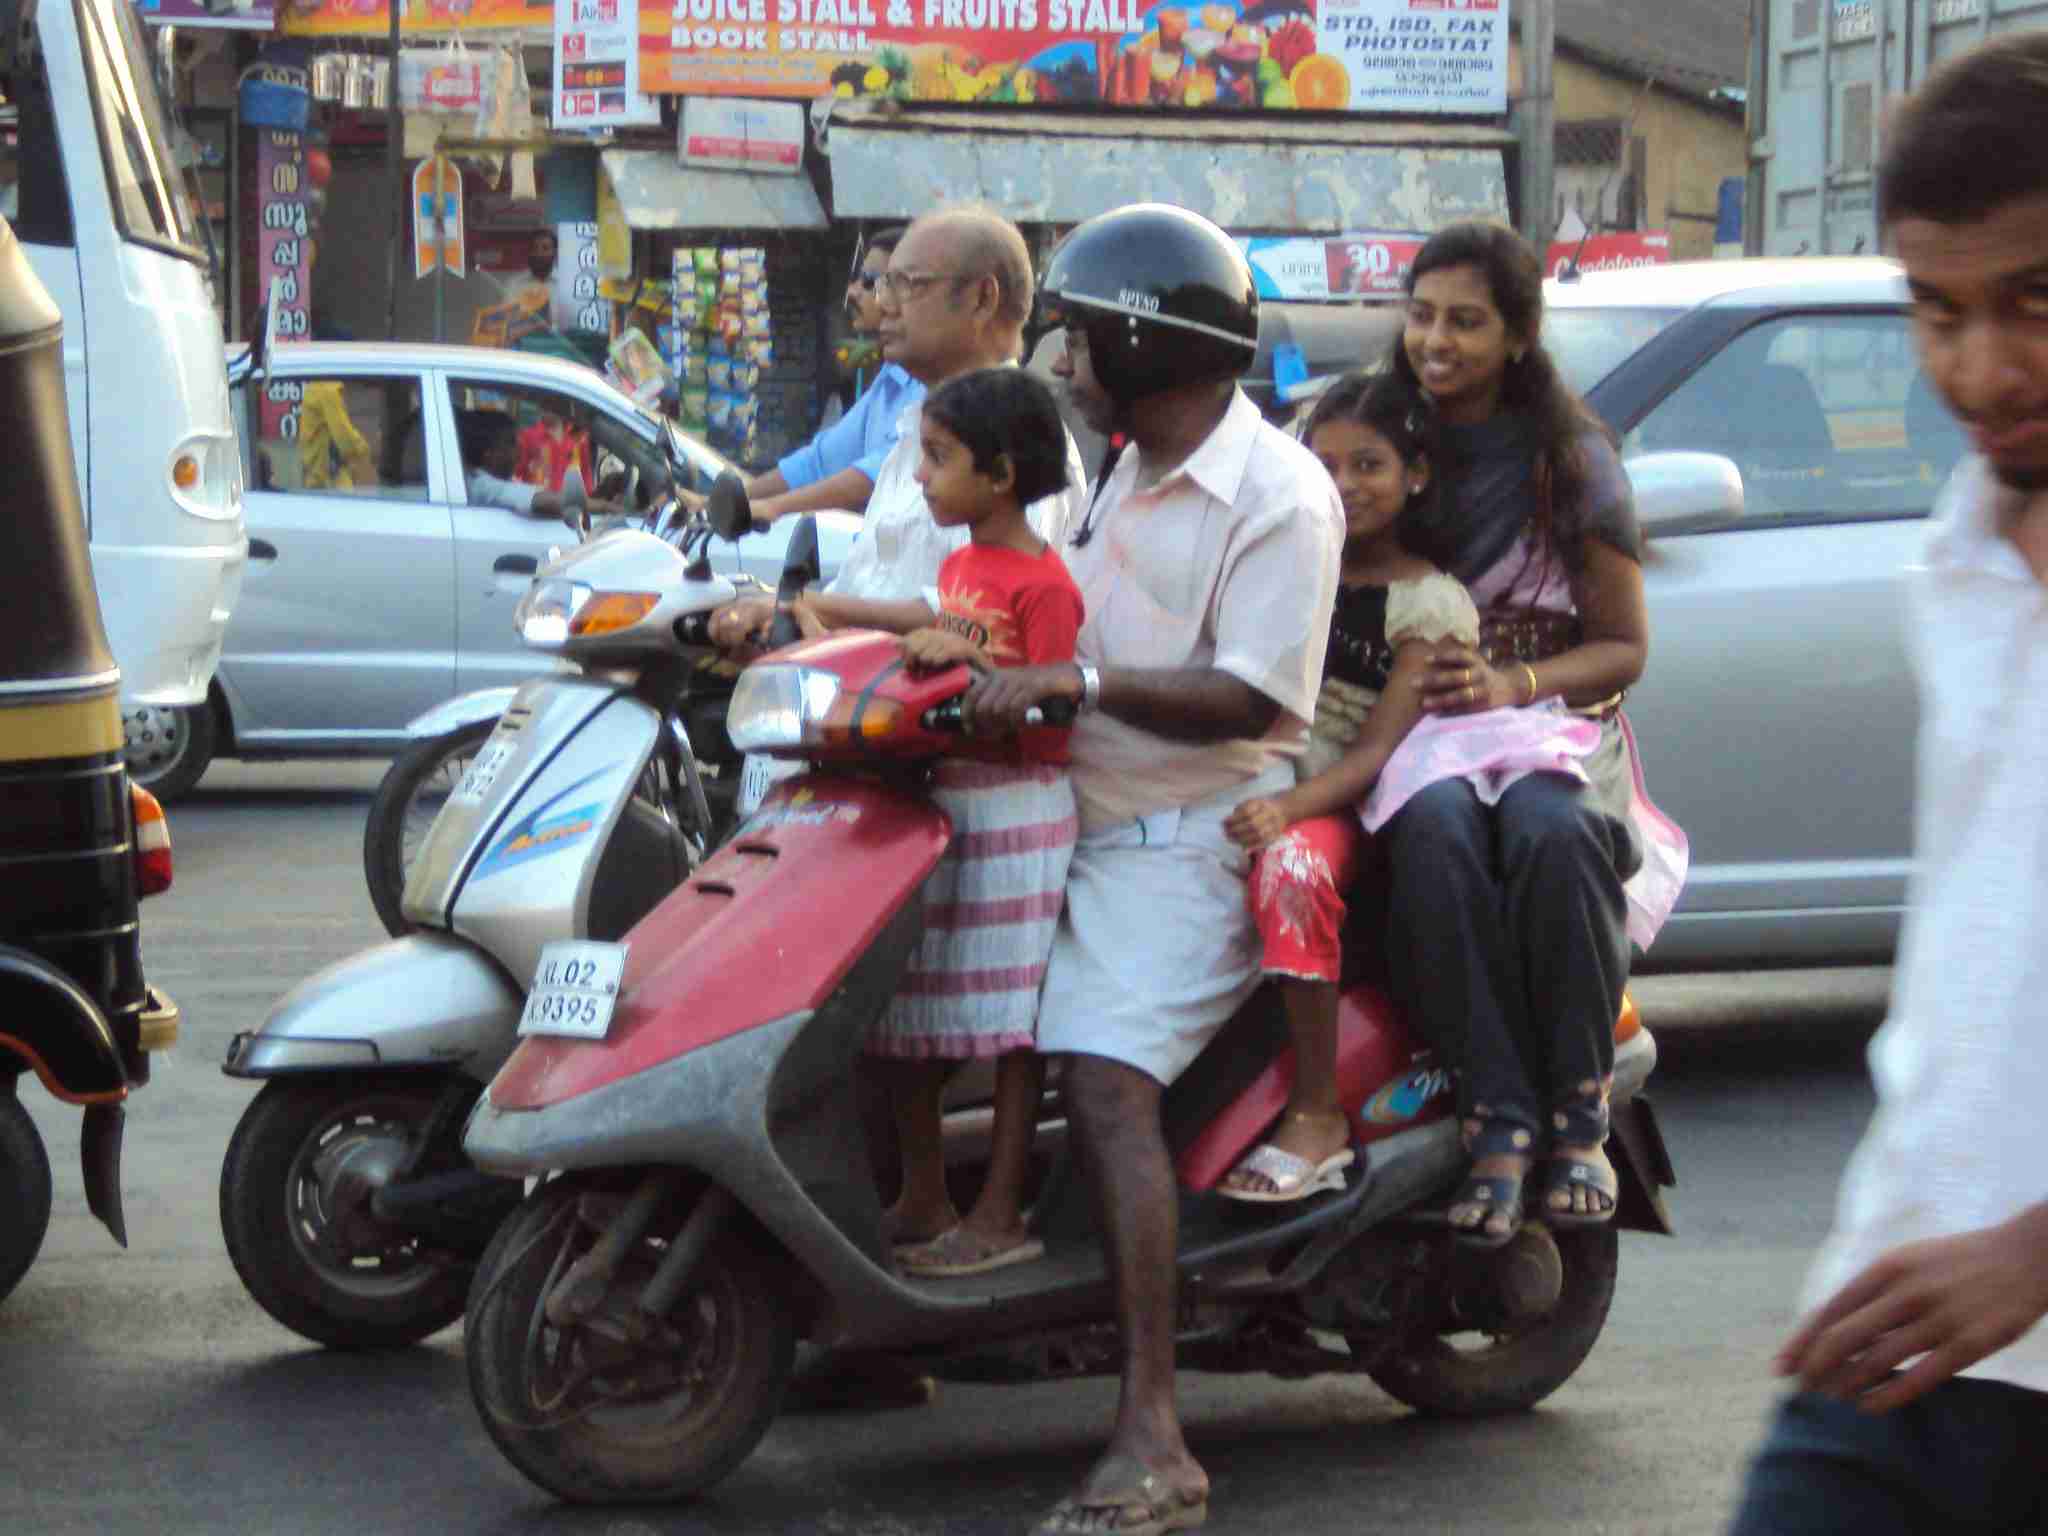 A whole family on a motorcycle